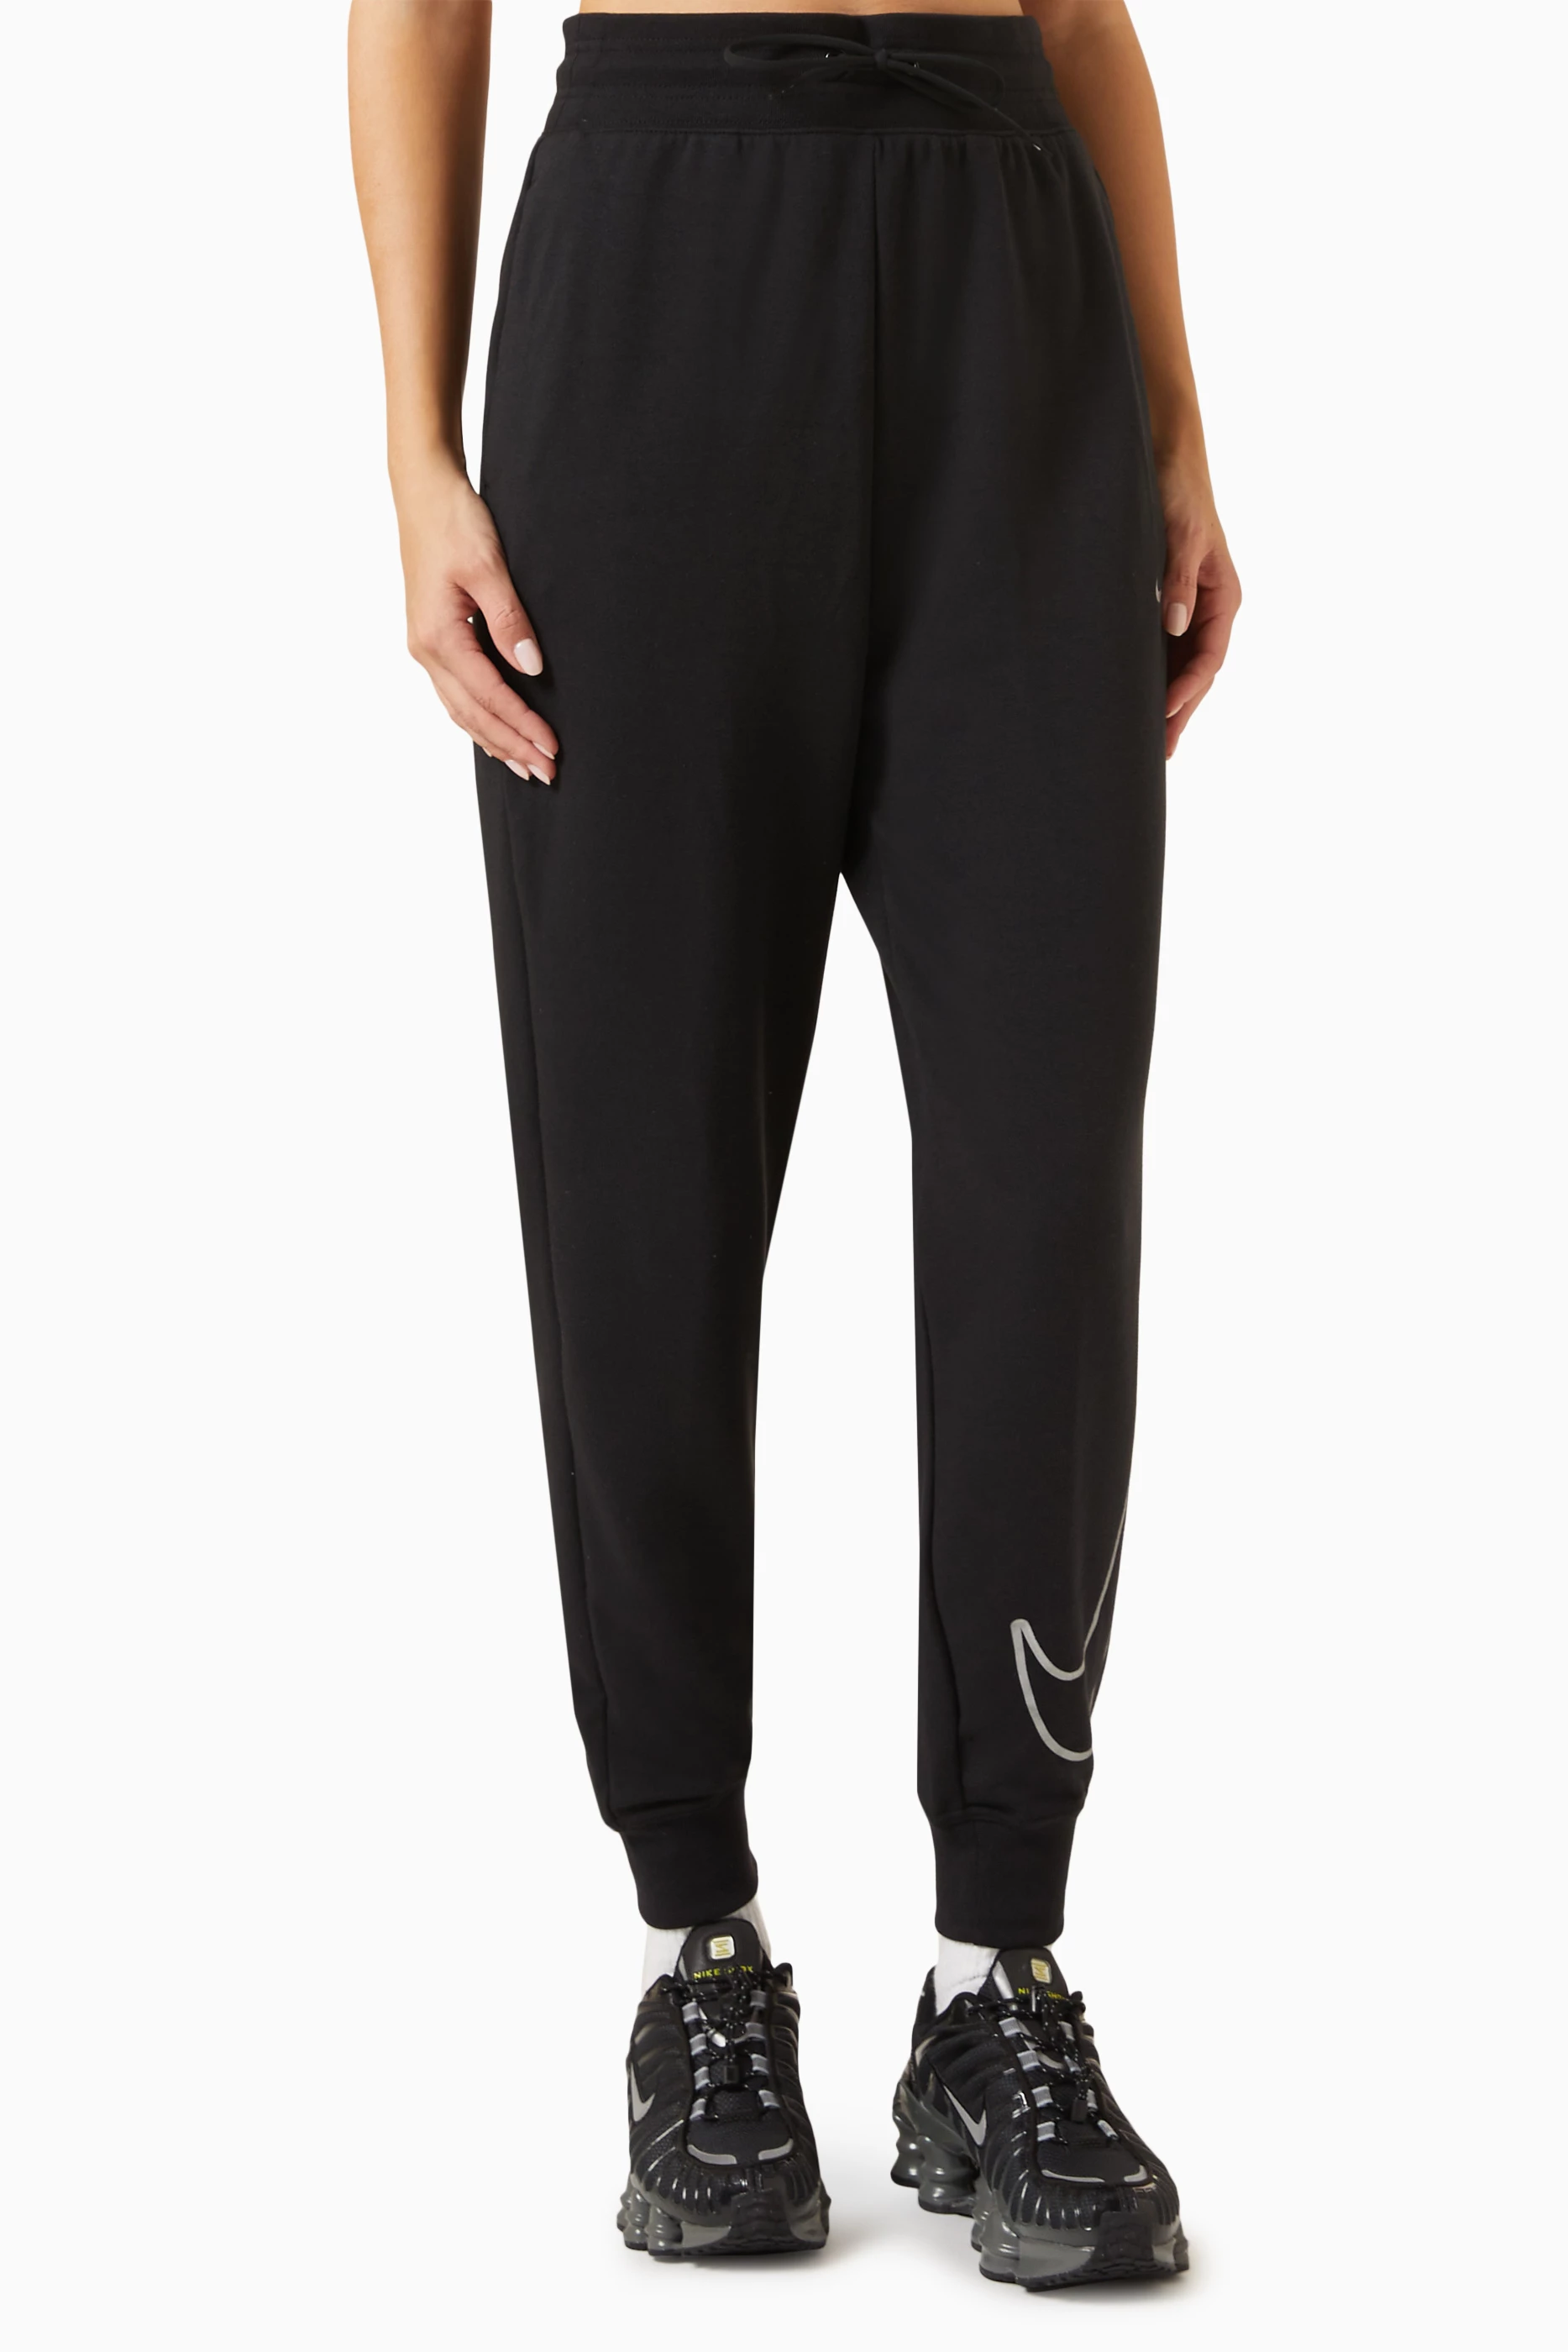 Buy Nike Black One 7/8 Graphic Pants in French Terry for Women in UAE